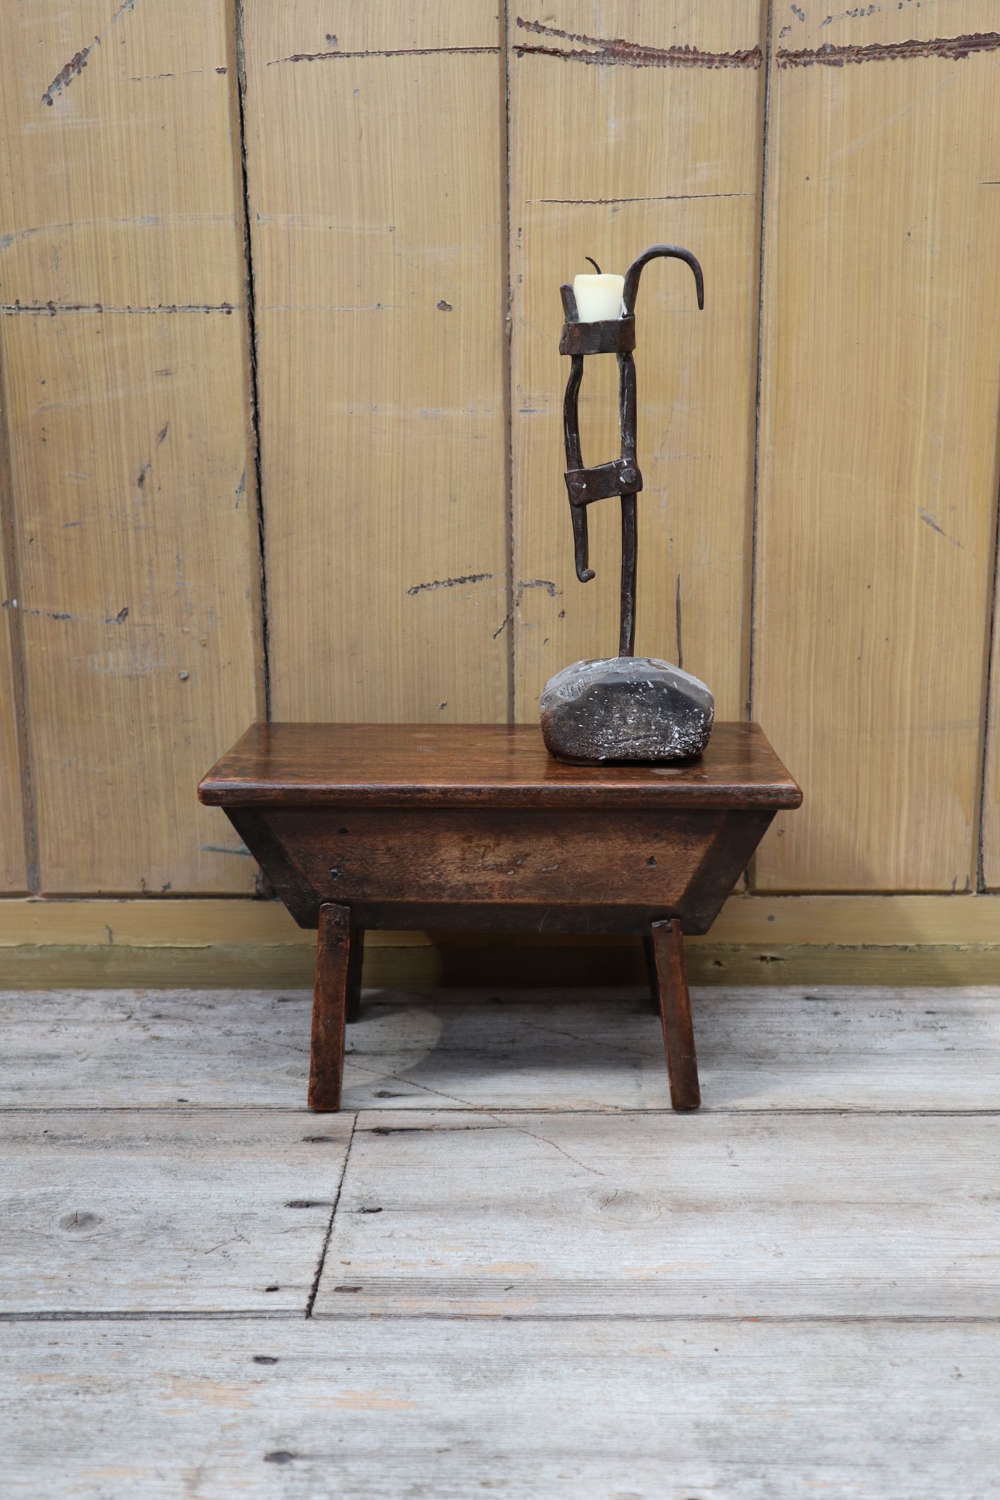 19th Century Scottish vernacular small creepie stool / candle stand